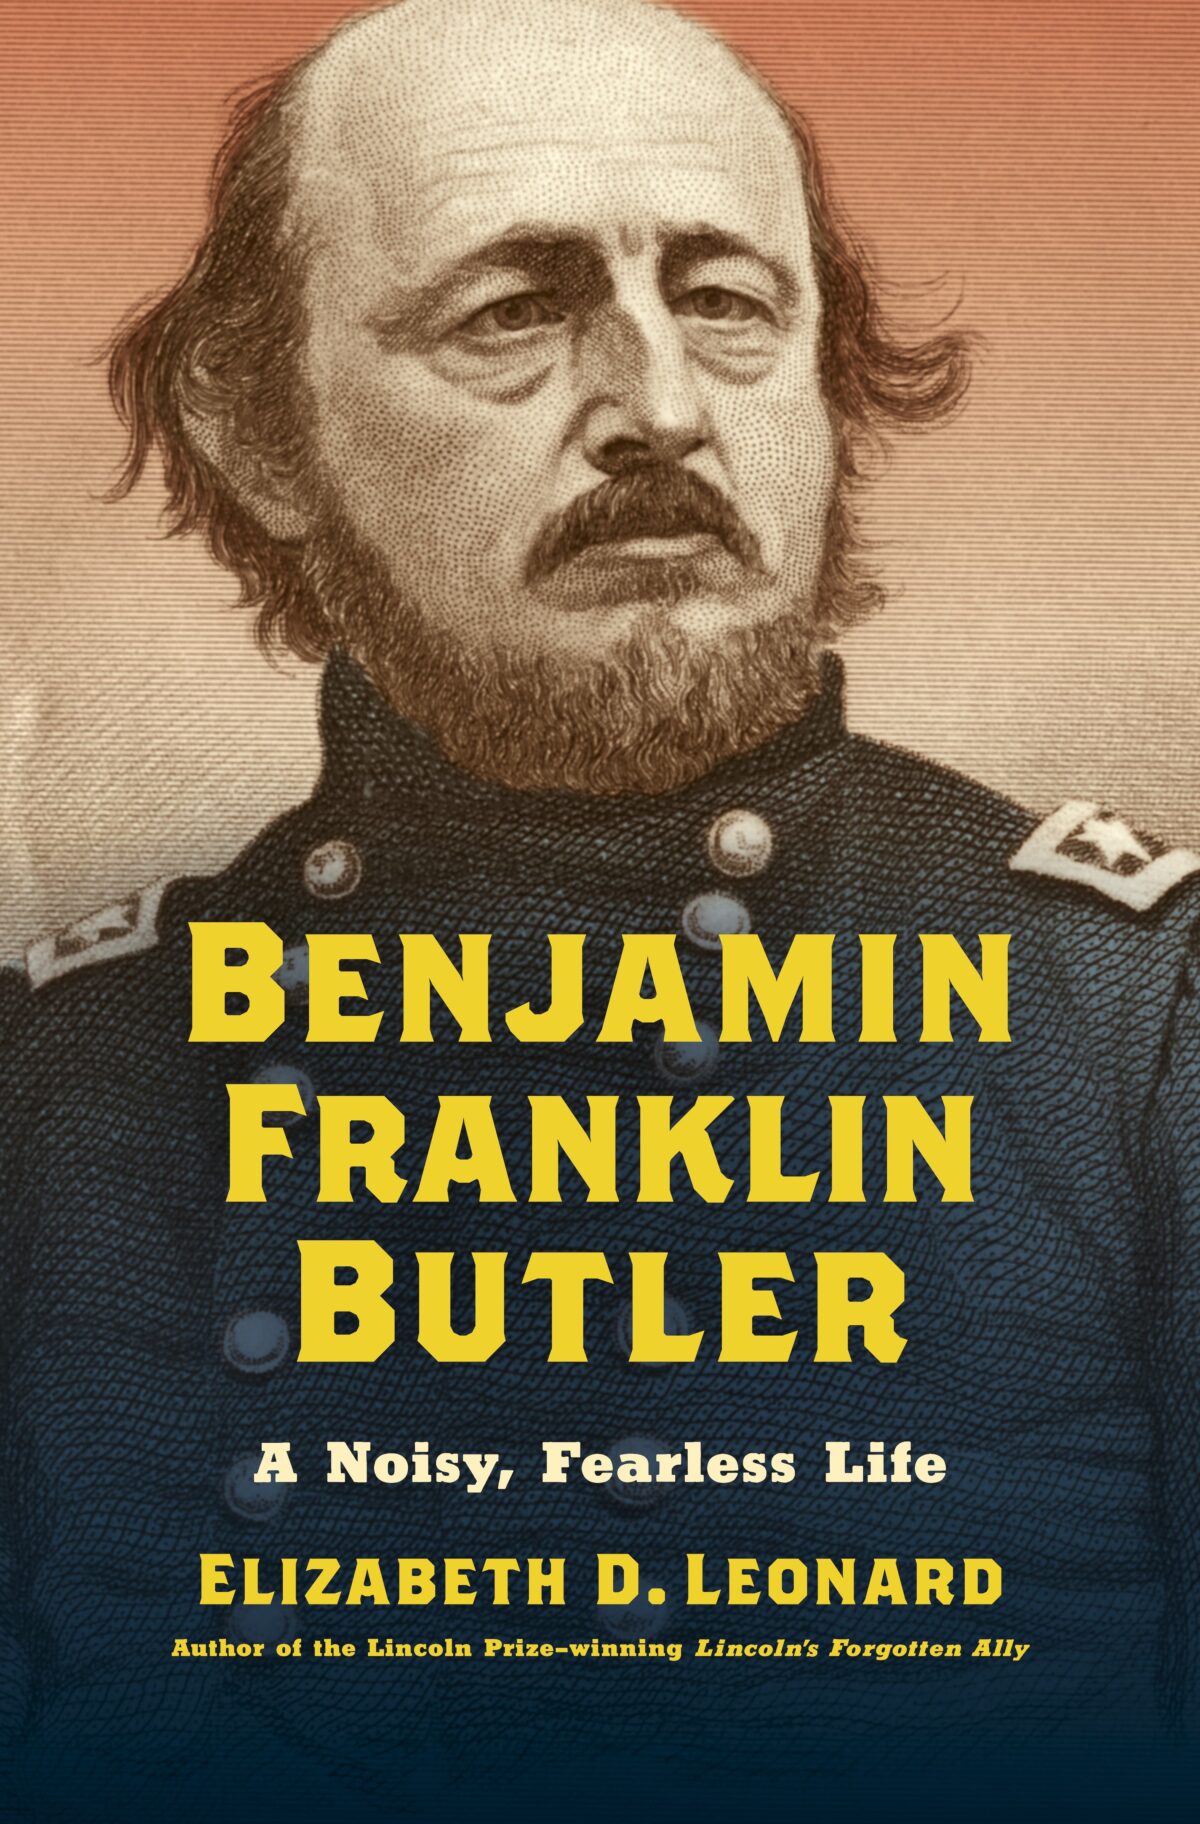 Book Recommender: ‘Benjamin Butler,’ the Story of the Civil War’s Most Misunderstood General